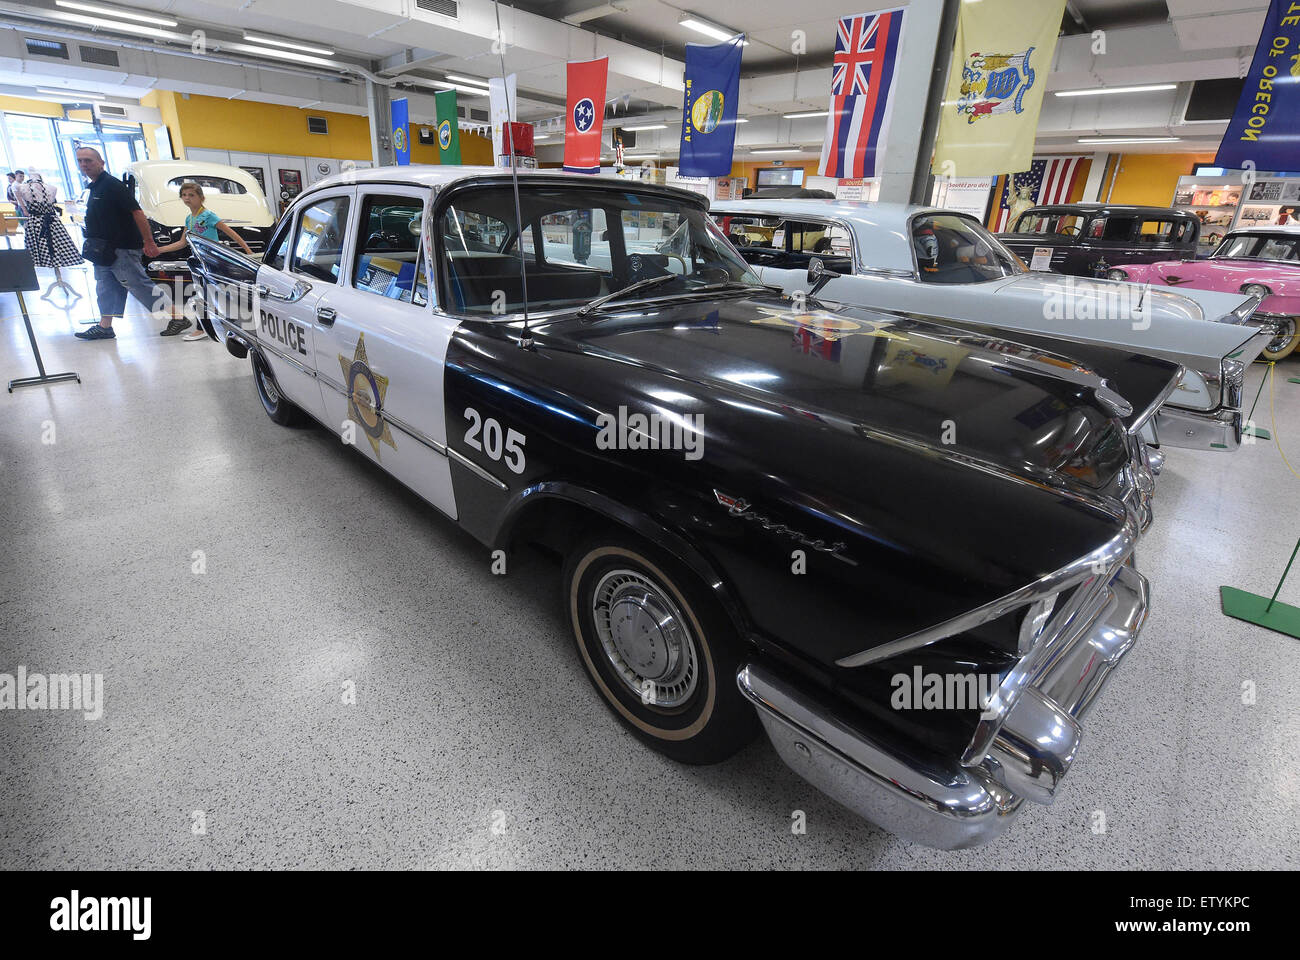 Ostrava, Czech Republic. 16th June, 2015. Exhibition called American Classic Cars from 1930 to 1980 launched today in Ostrava, Czech Republic, June 16, 2015. In the picture is seen police car Dodge Coronet from year 1959. © Jaroslav Ozana/CTK Photo/Alamy Live News Stock Photo